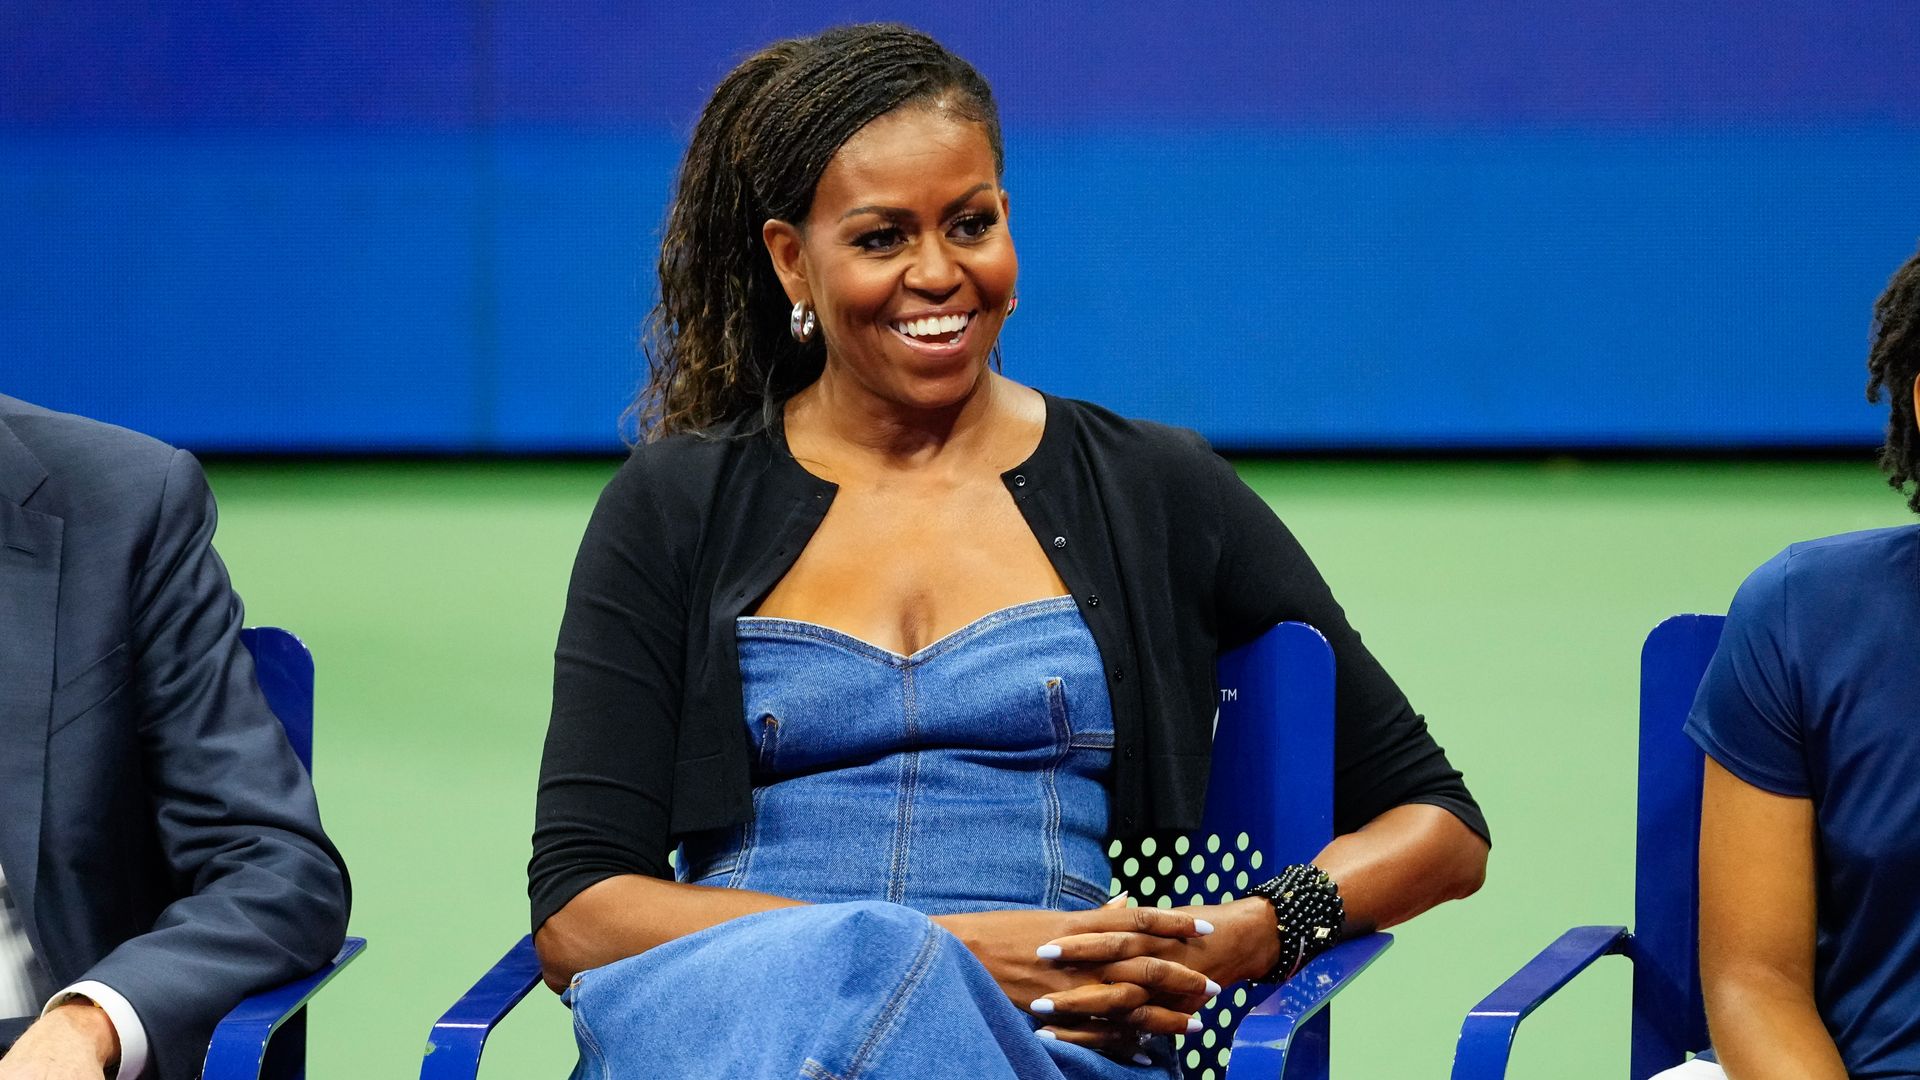 WATCH: Michelle Obama encourages voters on Juneteenth; 'Make your voice heard'